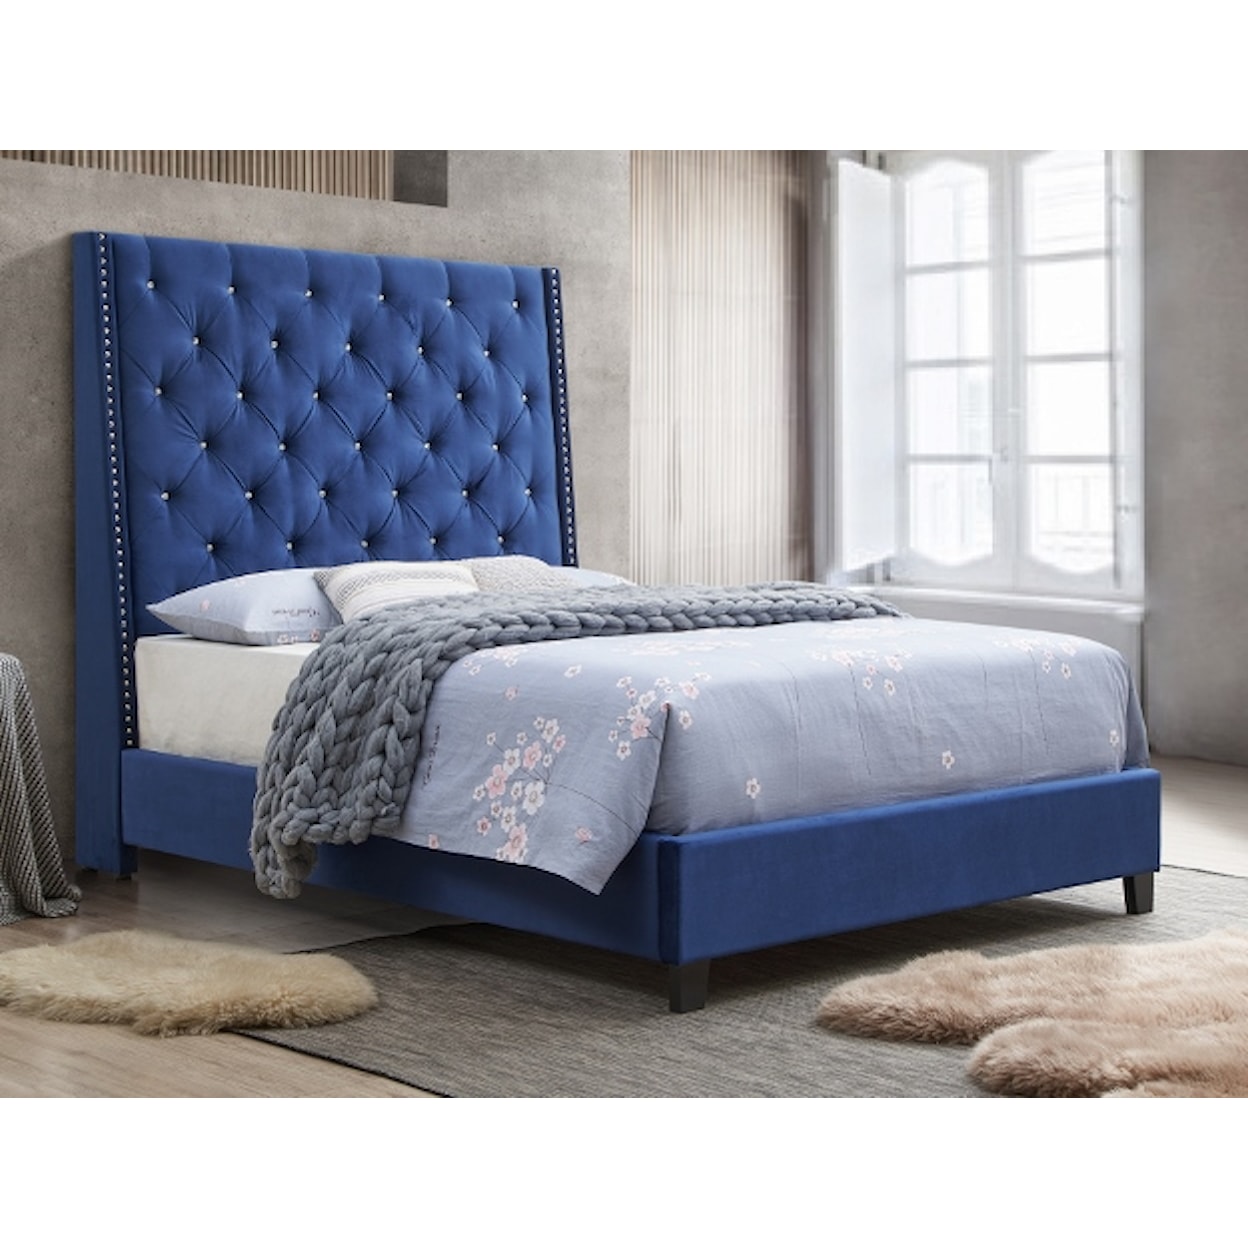 CM Chantilly Queen Upholstered Bed